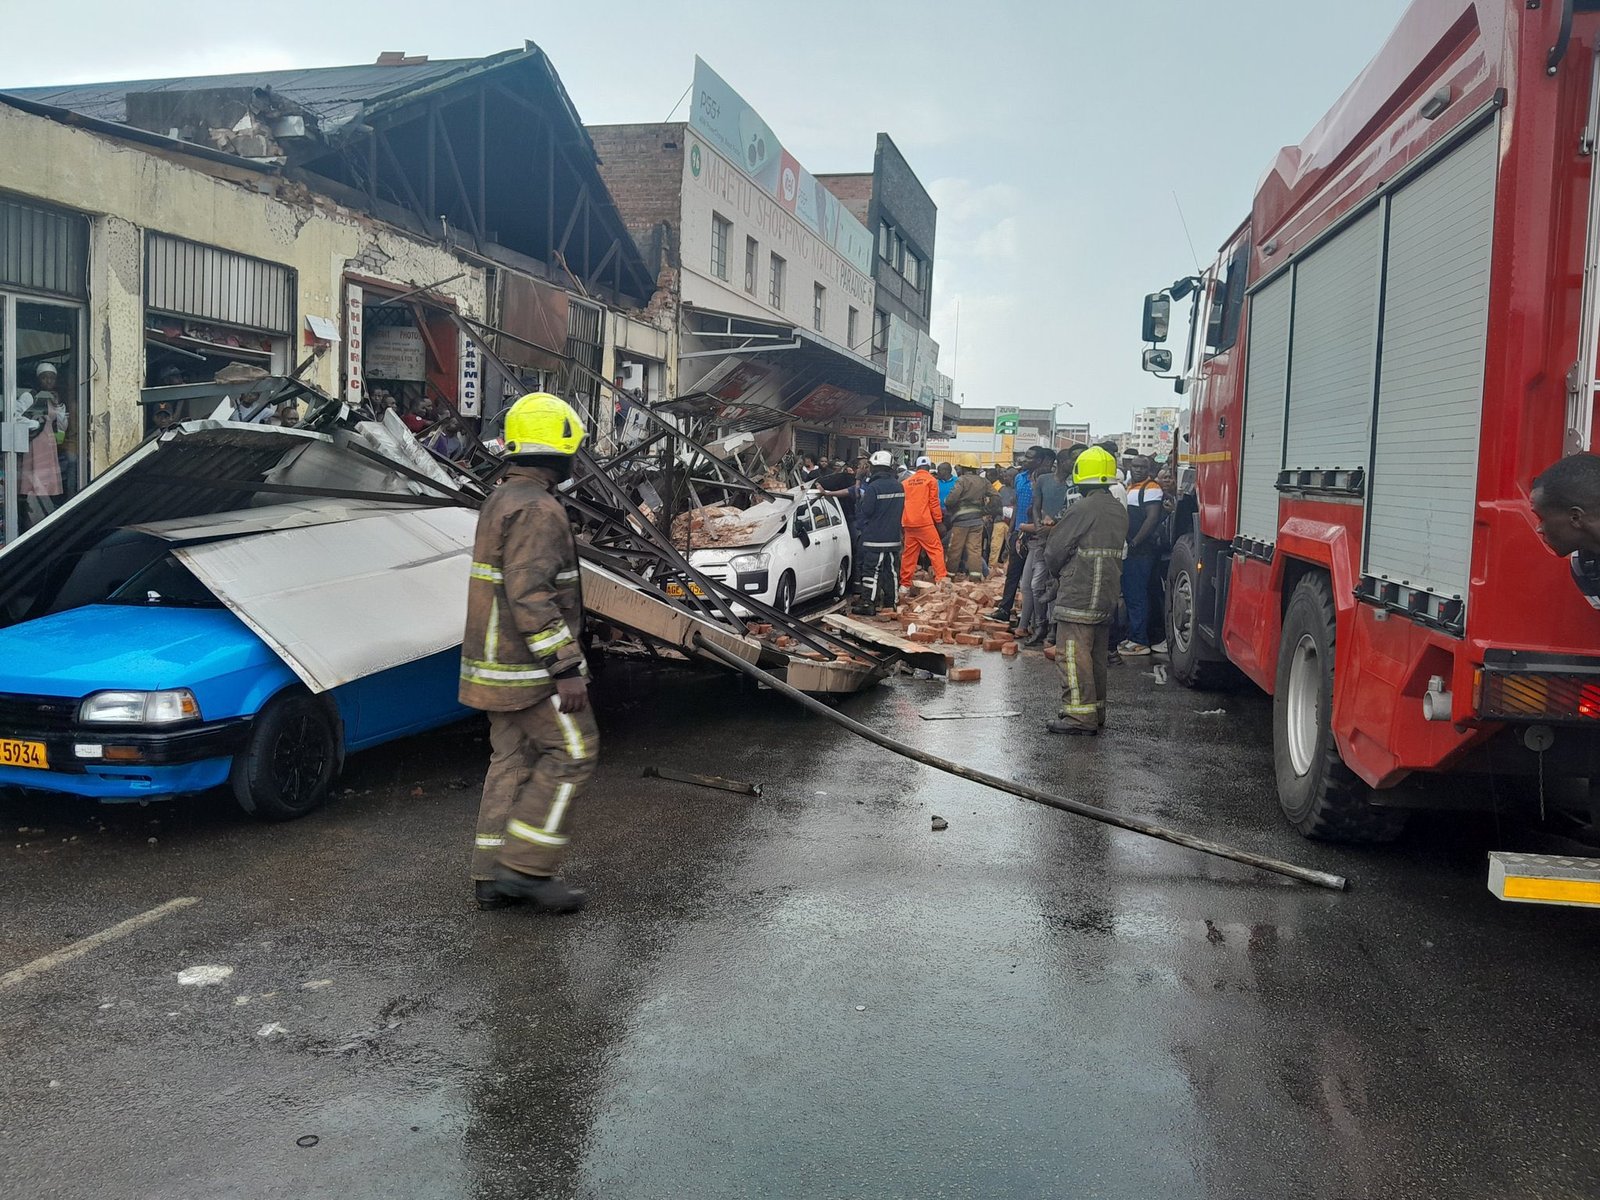 Harare Building Collapse Four Dead in City Centre Tragedy | Report Focus News